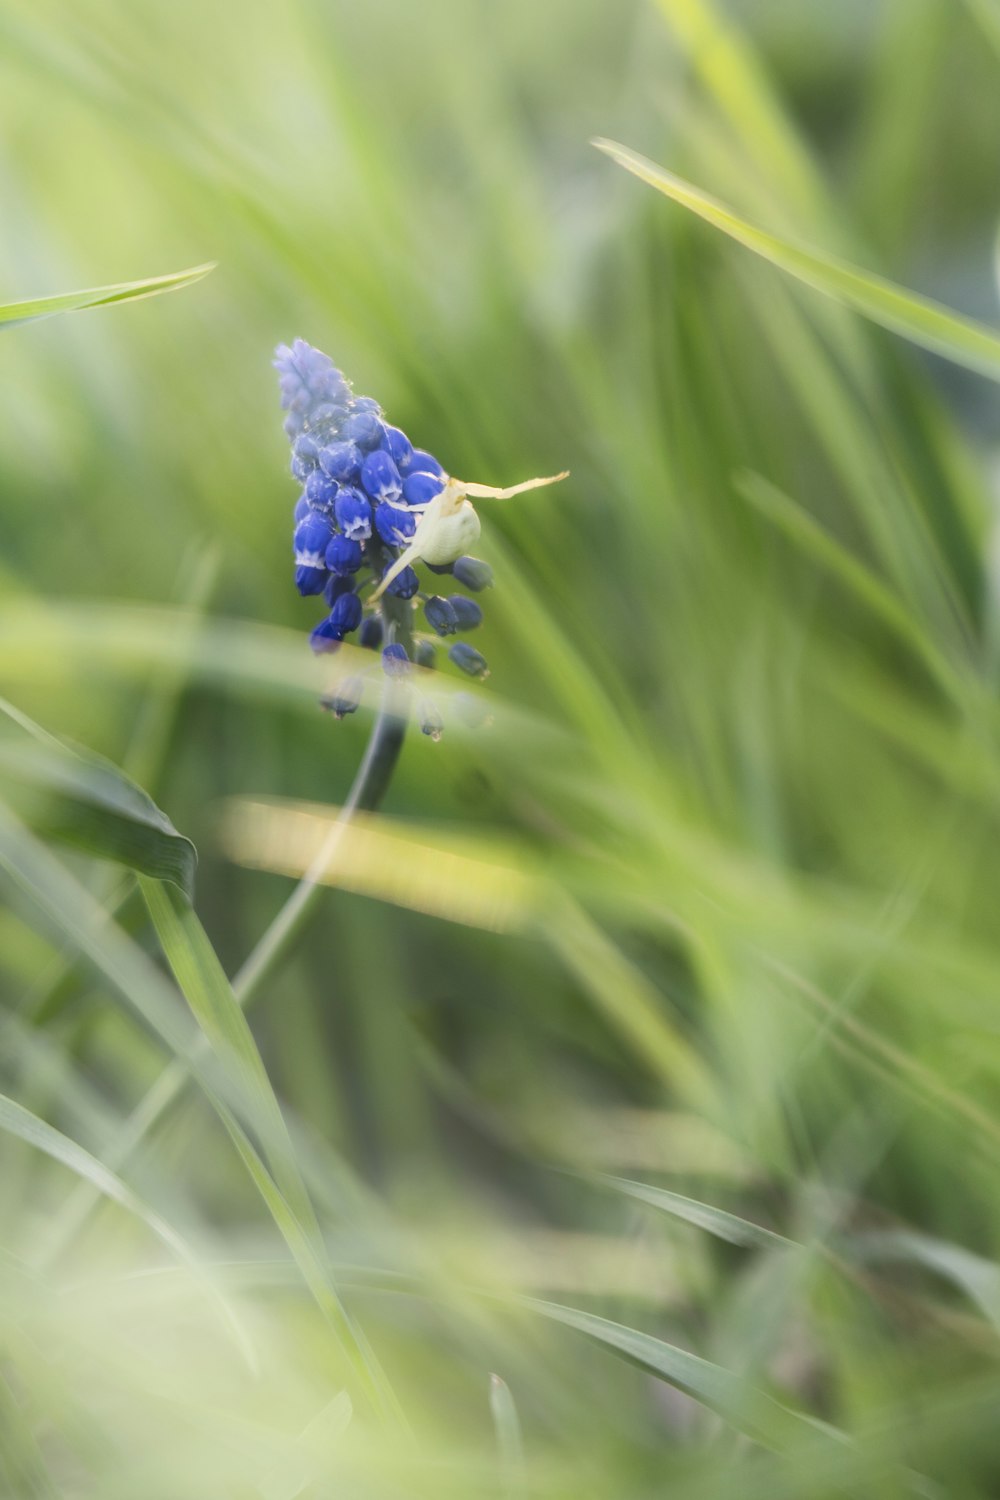 a close up of a blue flower in the grass